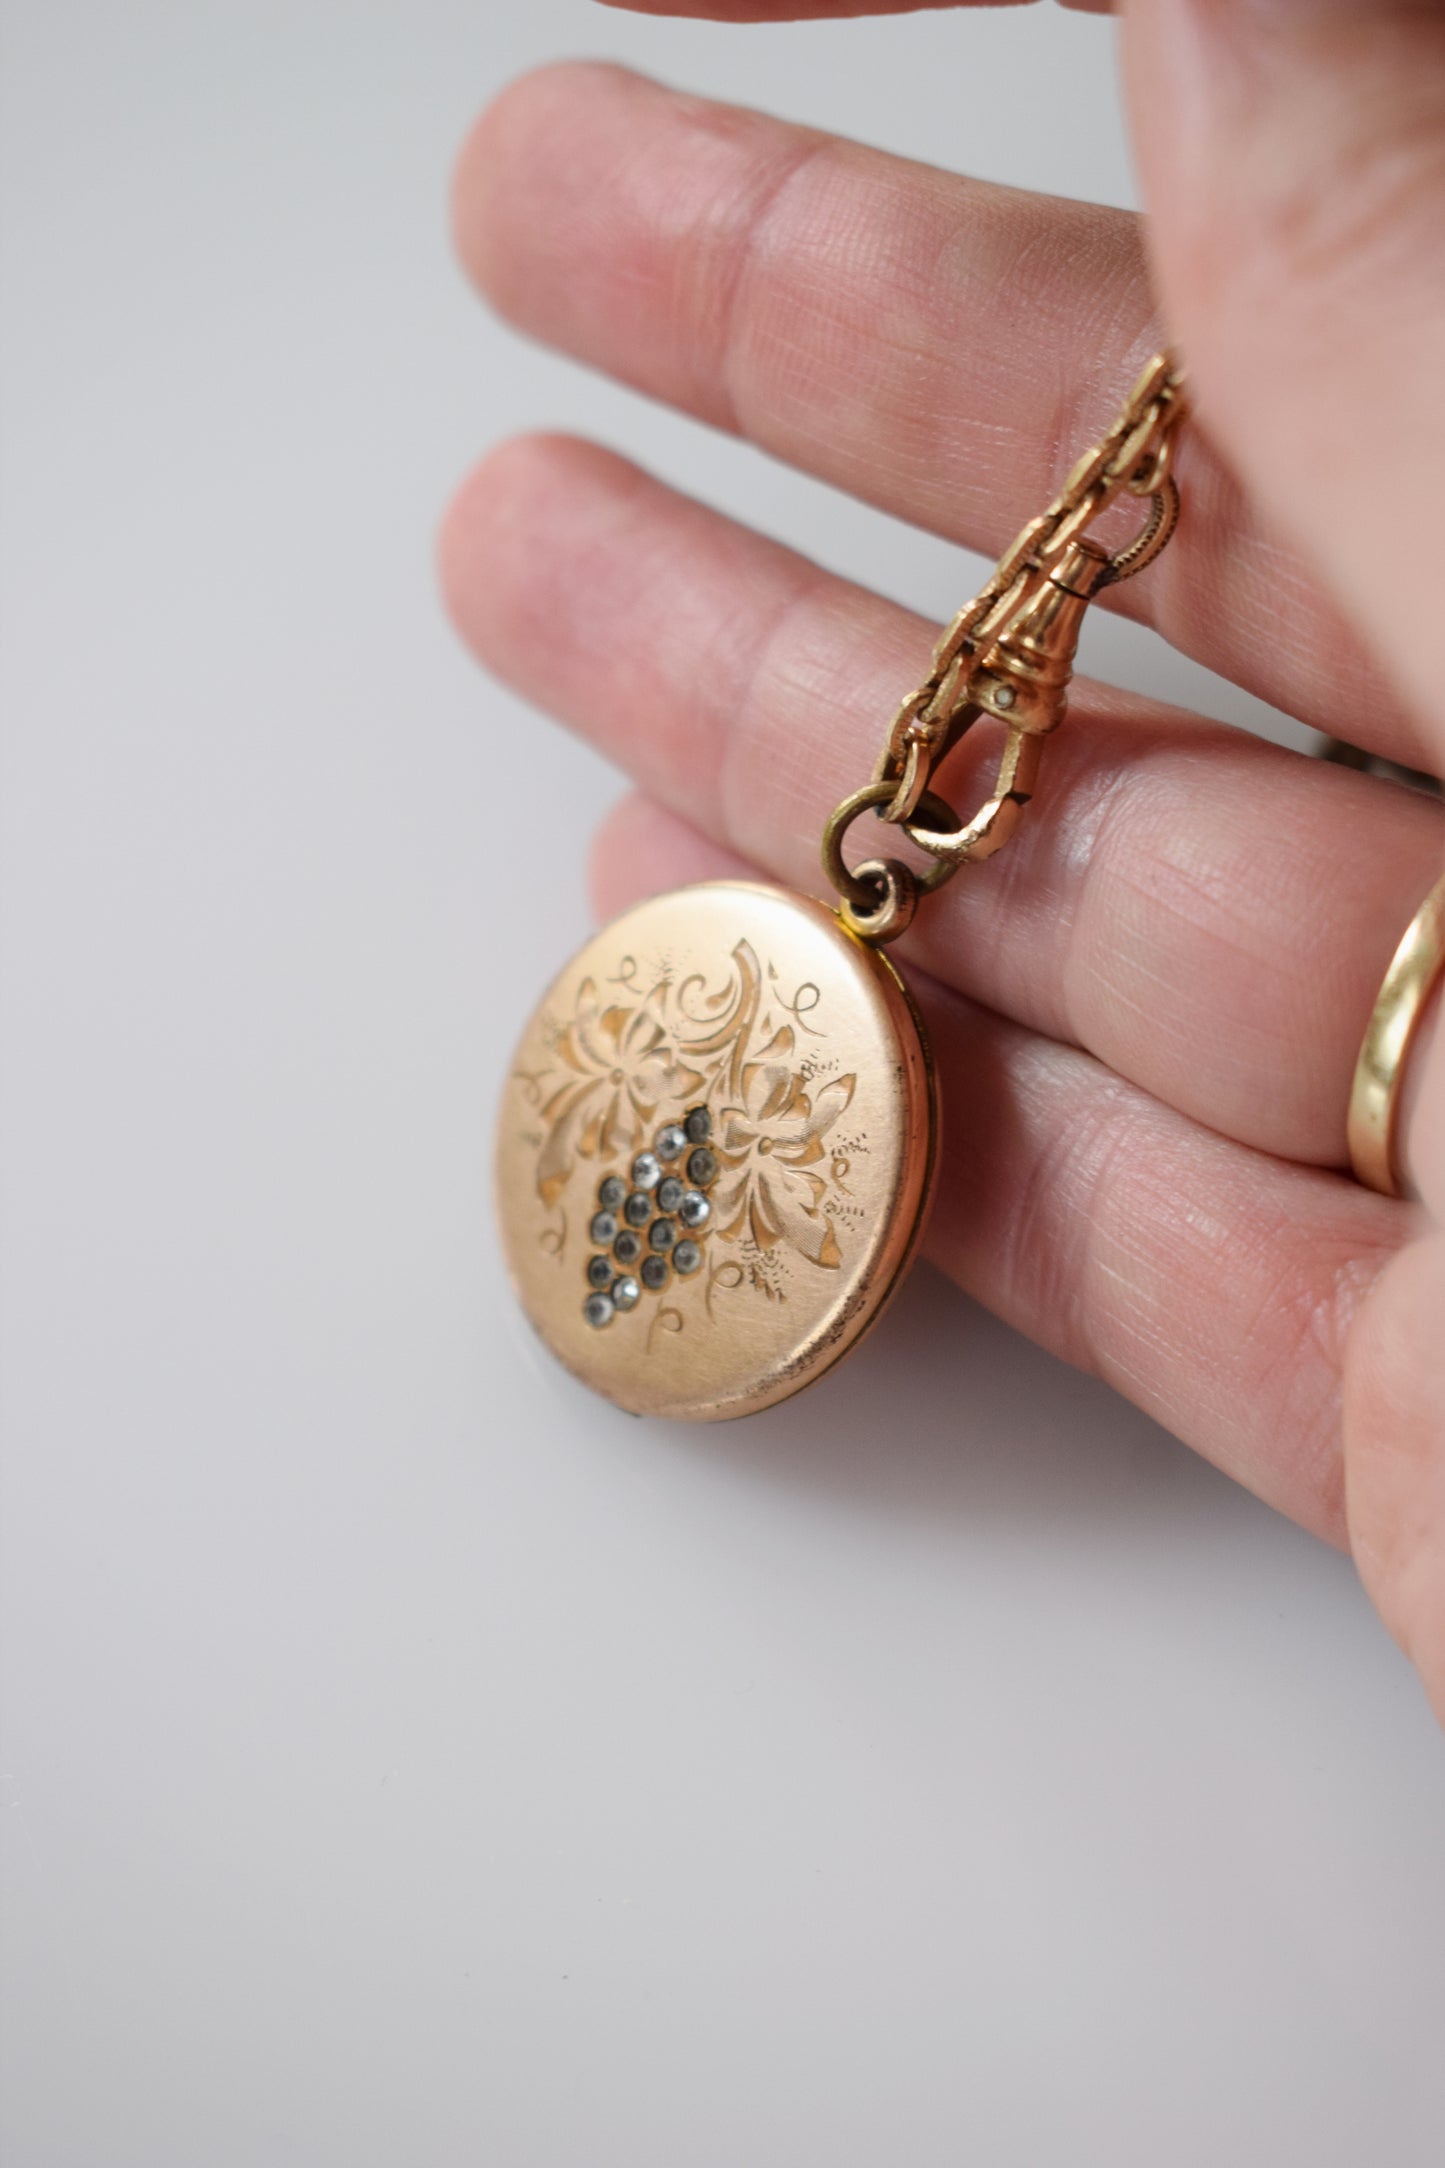 Antique Gold-Filled Grape Cluster Locket with Deco Fob Chain